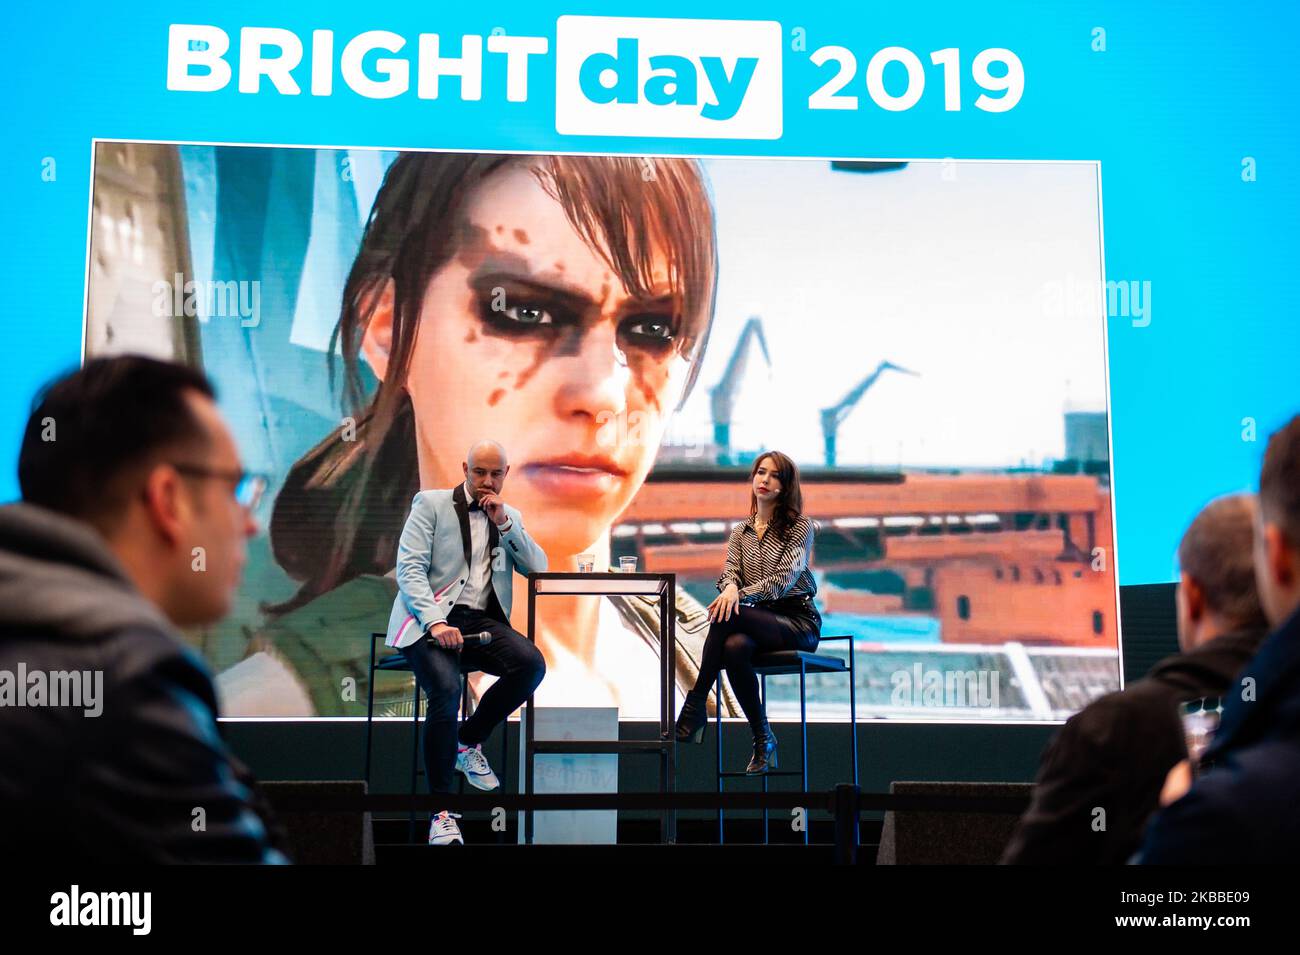 Stefanie Joosten, who was chosen as both the visual and voice model for Quiet, a central female character in the Metal Gear game Metal Gear Solid V: The Phantom Pain is giving a talk during the Bright Day Festival in Amsterdam, on November 23rd, 2019. (Photo by Romy Arroyo Fernandez/NurPhoto) Stock Photo